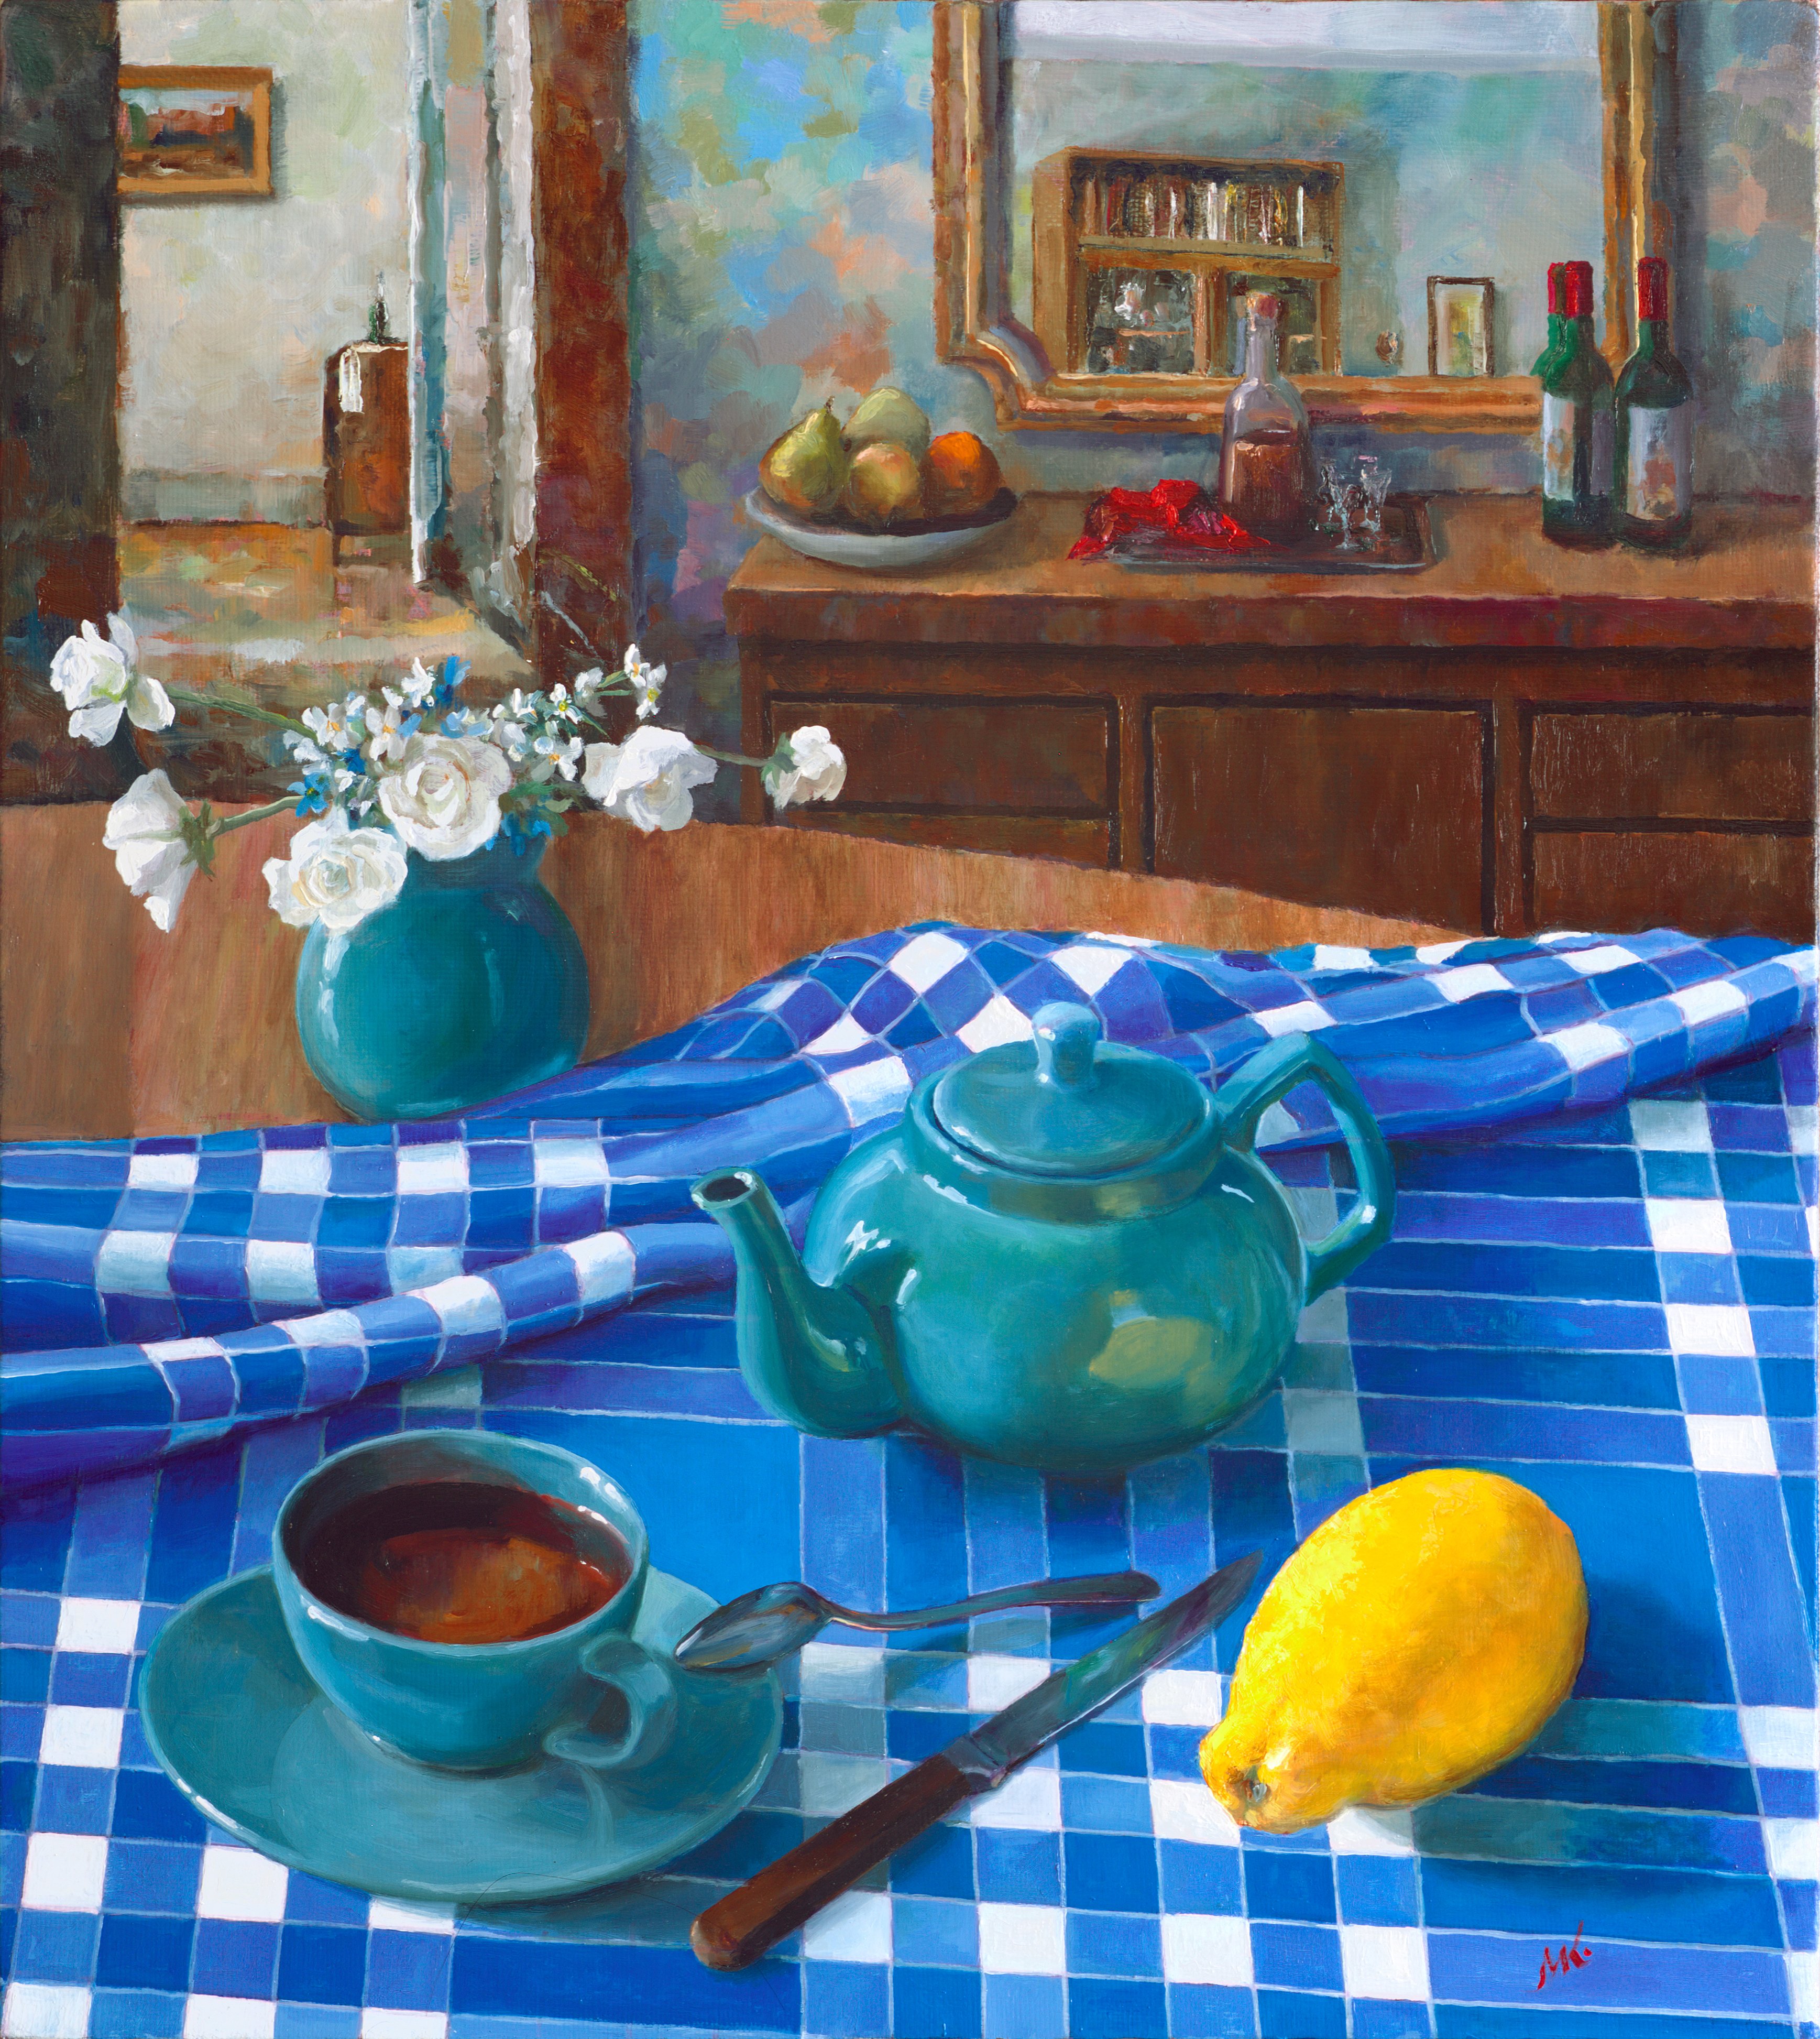 Mikhail Velavok; Tea With Lemon Comp 2, 2018, Original Painting Oil, 50 x 56 cm. Artwork description: 241 Original oil painting on stretched canvas. The artwork is being sold unframed. The frame in the additional photo is an example only.tea, lemon, teapot, cup, still life, blue, checkered, fold, room, interior...